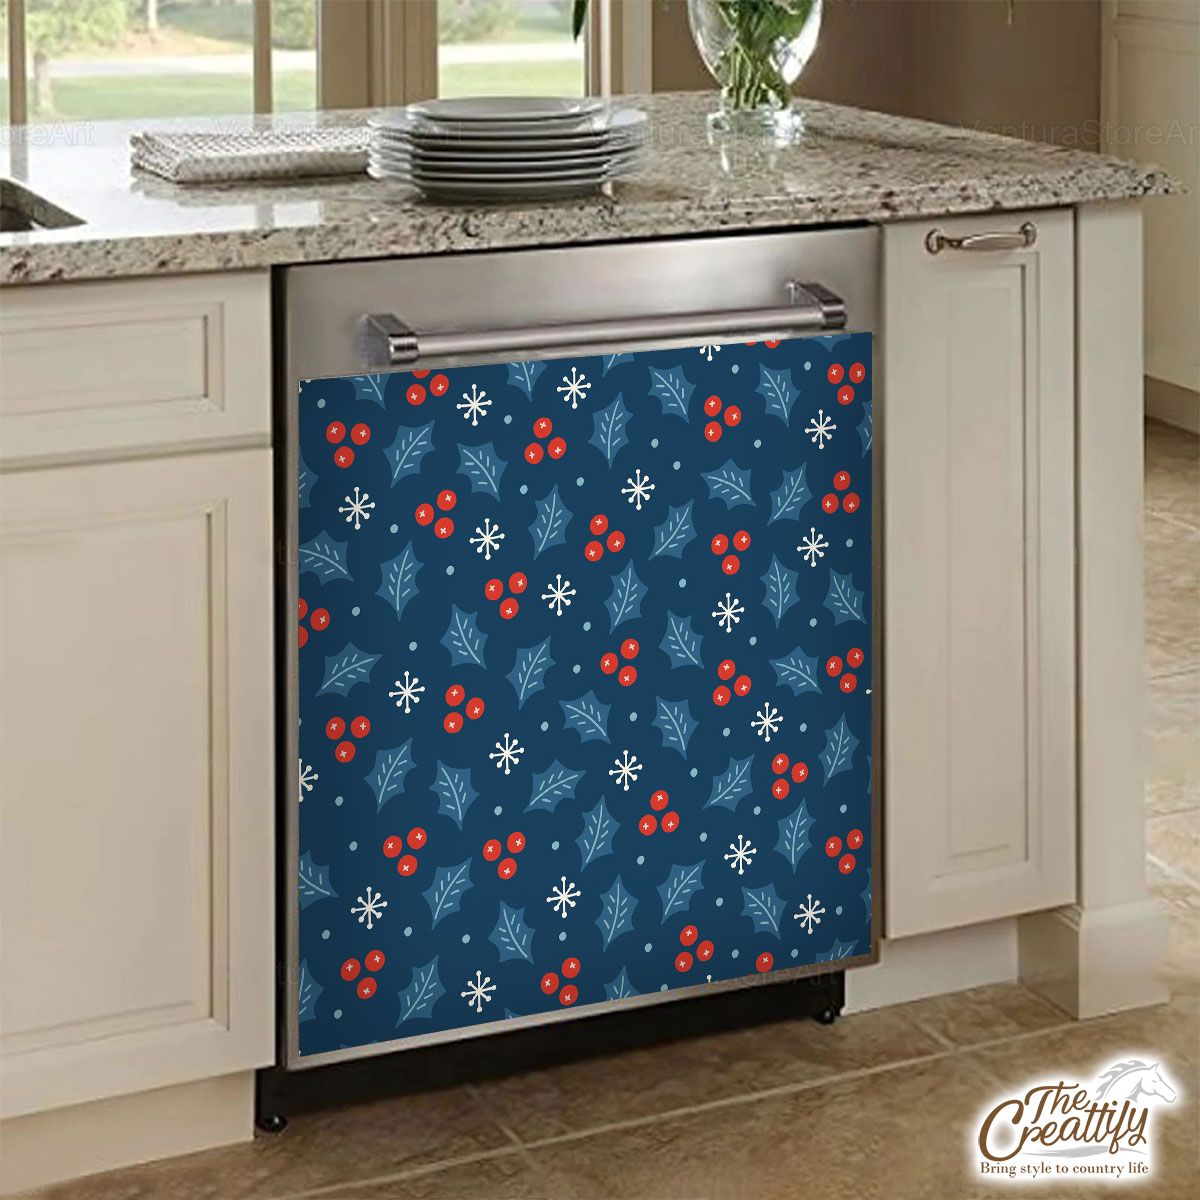 Snowflake And Holly Leaf Pattern Dishwasher Cover